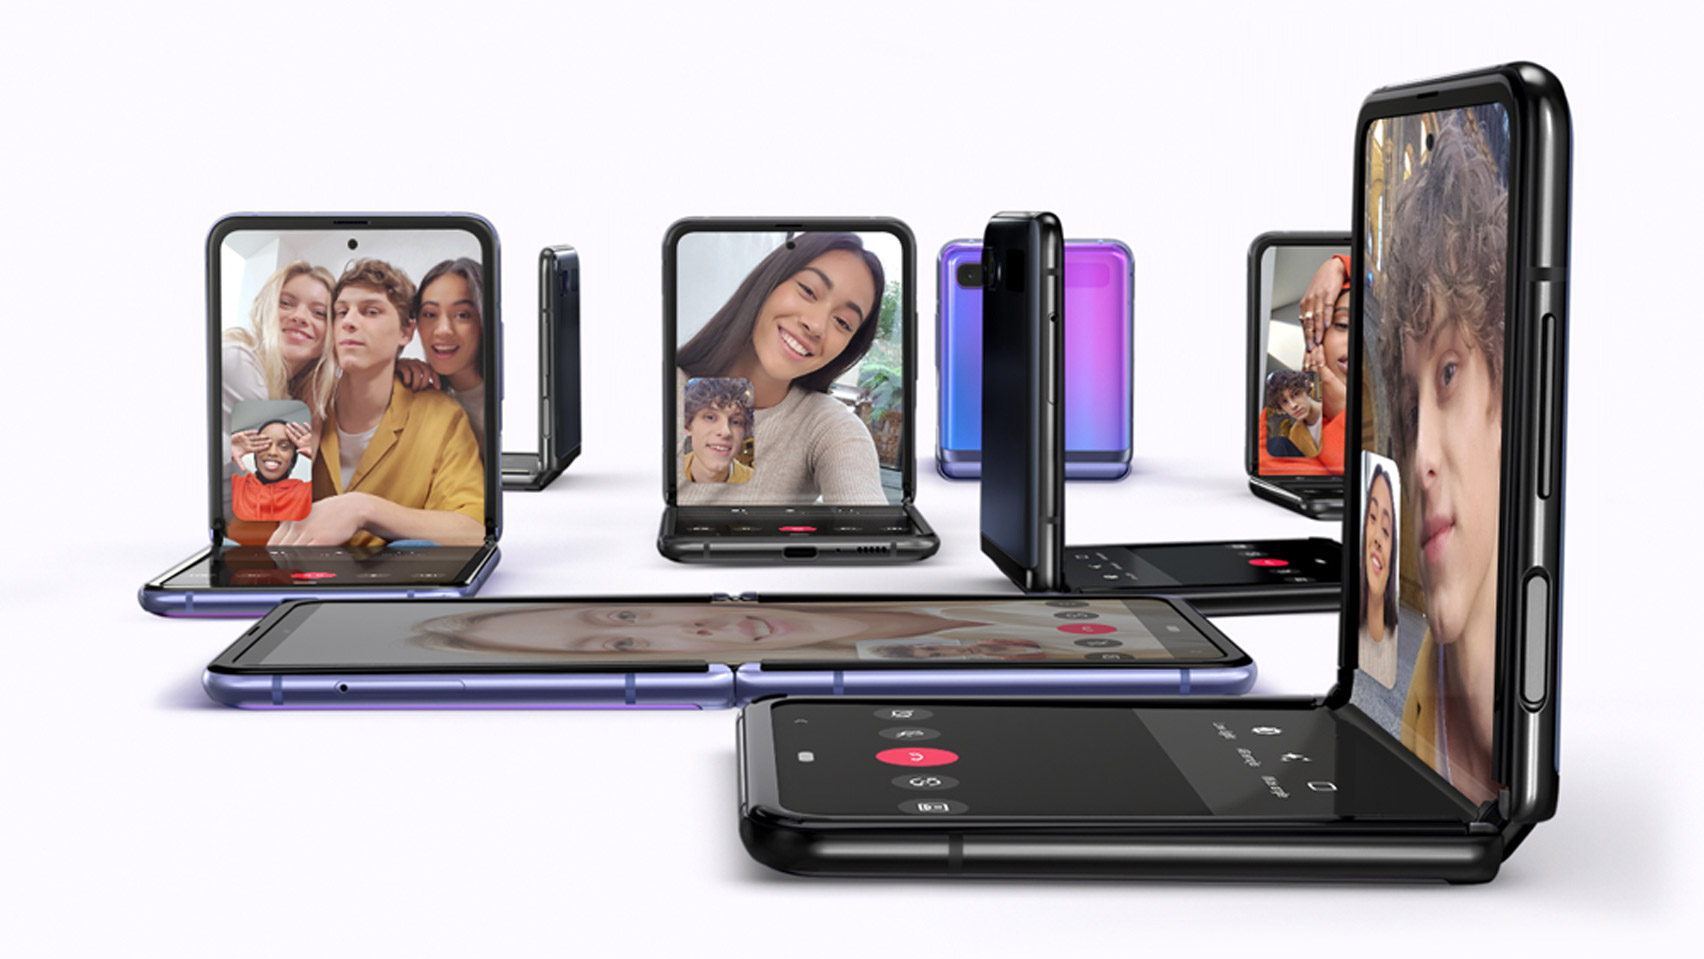 Samsung Releases Foldable Galaxy Z Flip Smartphone